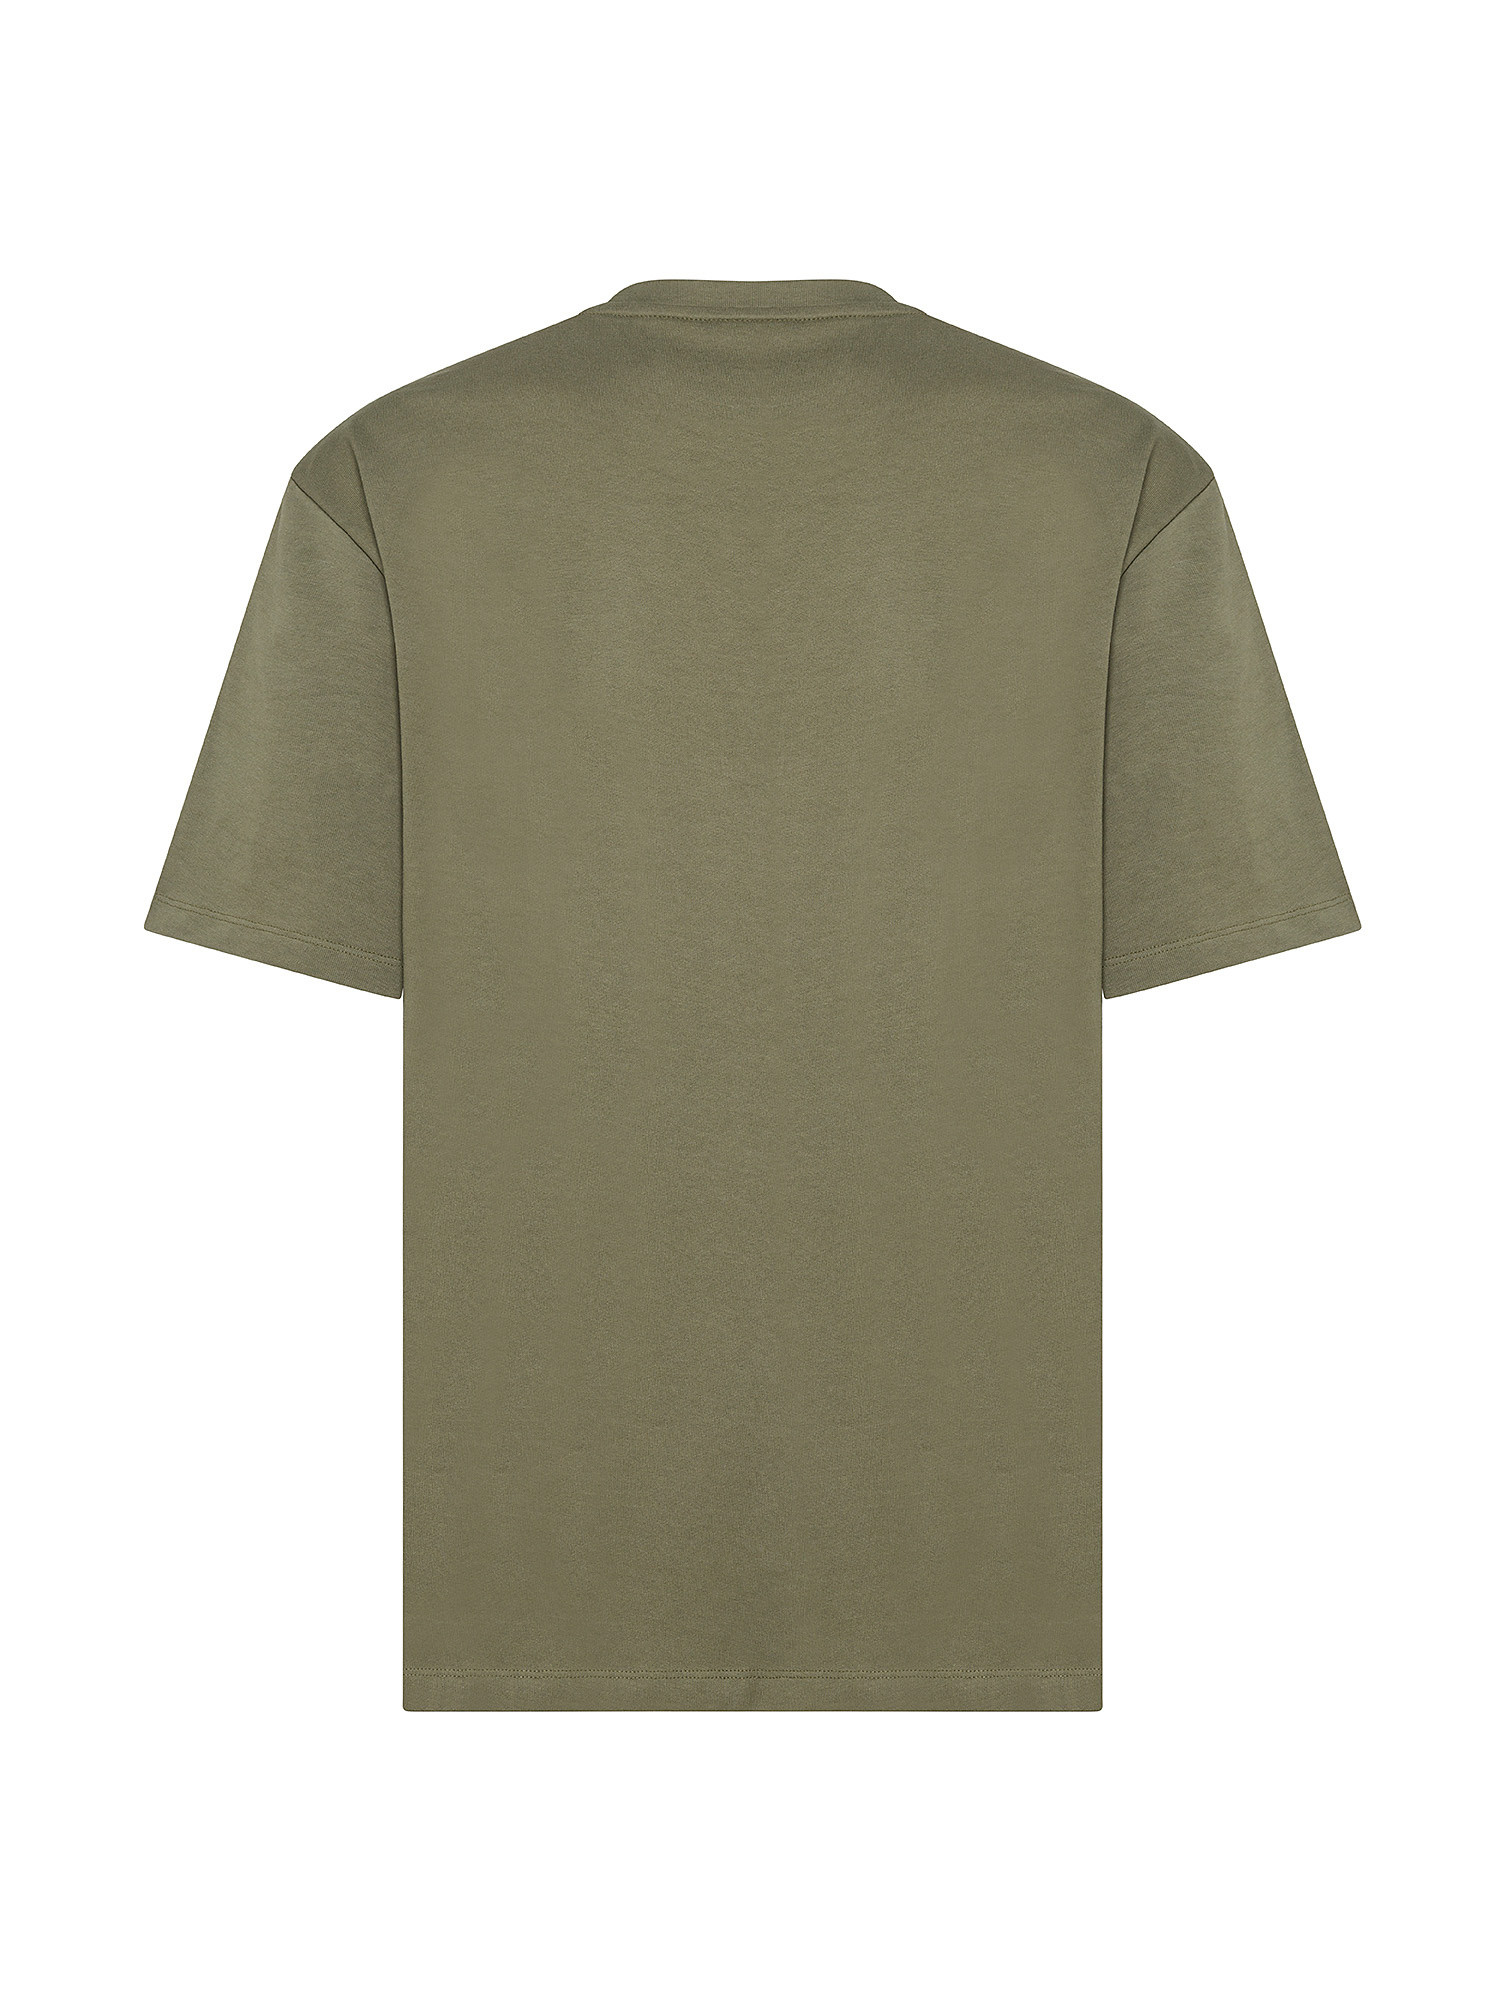 Hugo - T-shirt con stampa logo in cotone, Verde scuro, large image number 1